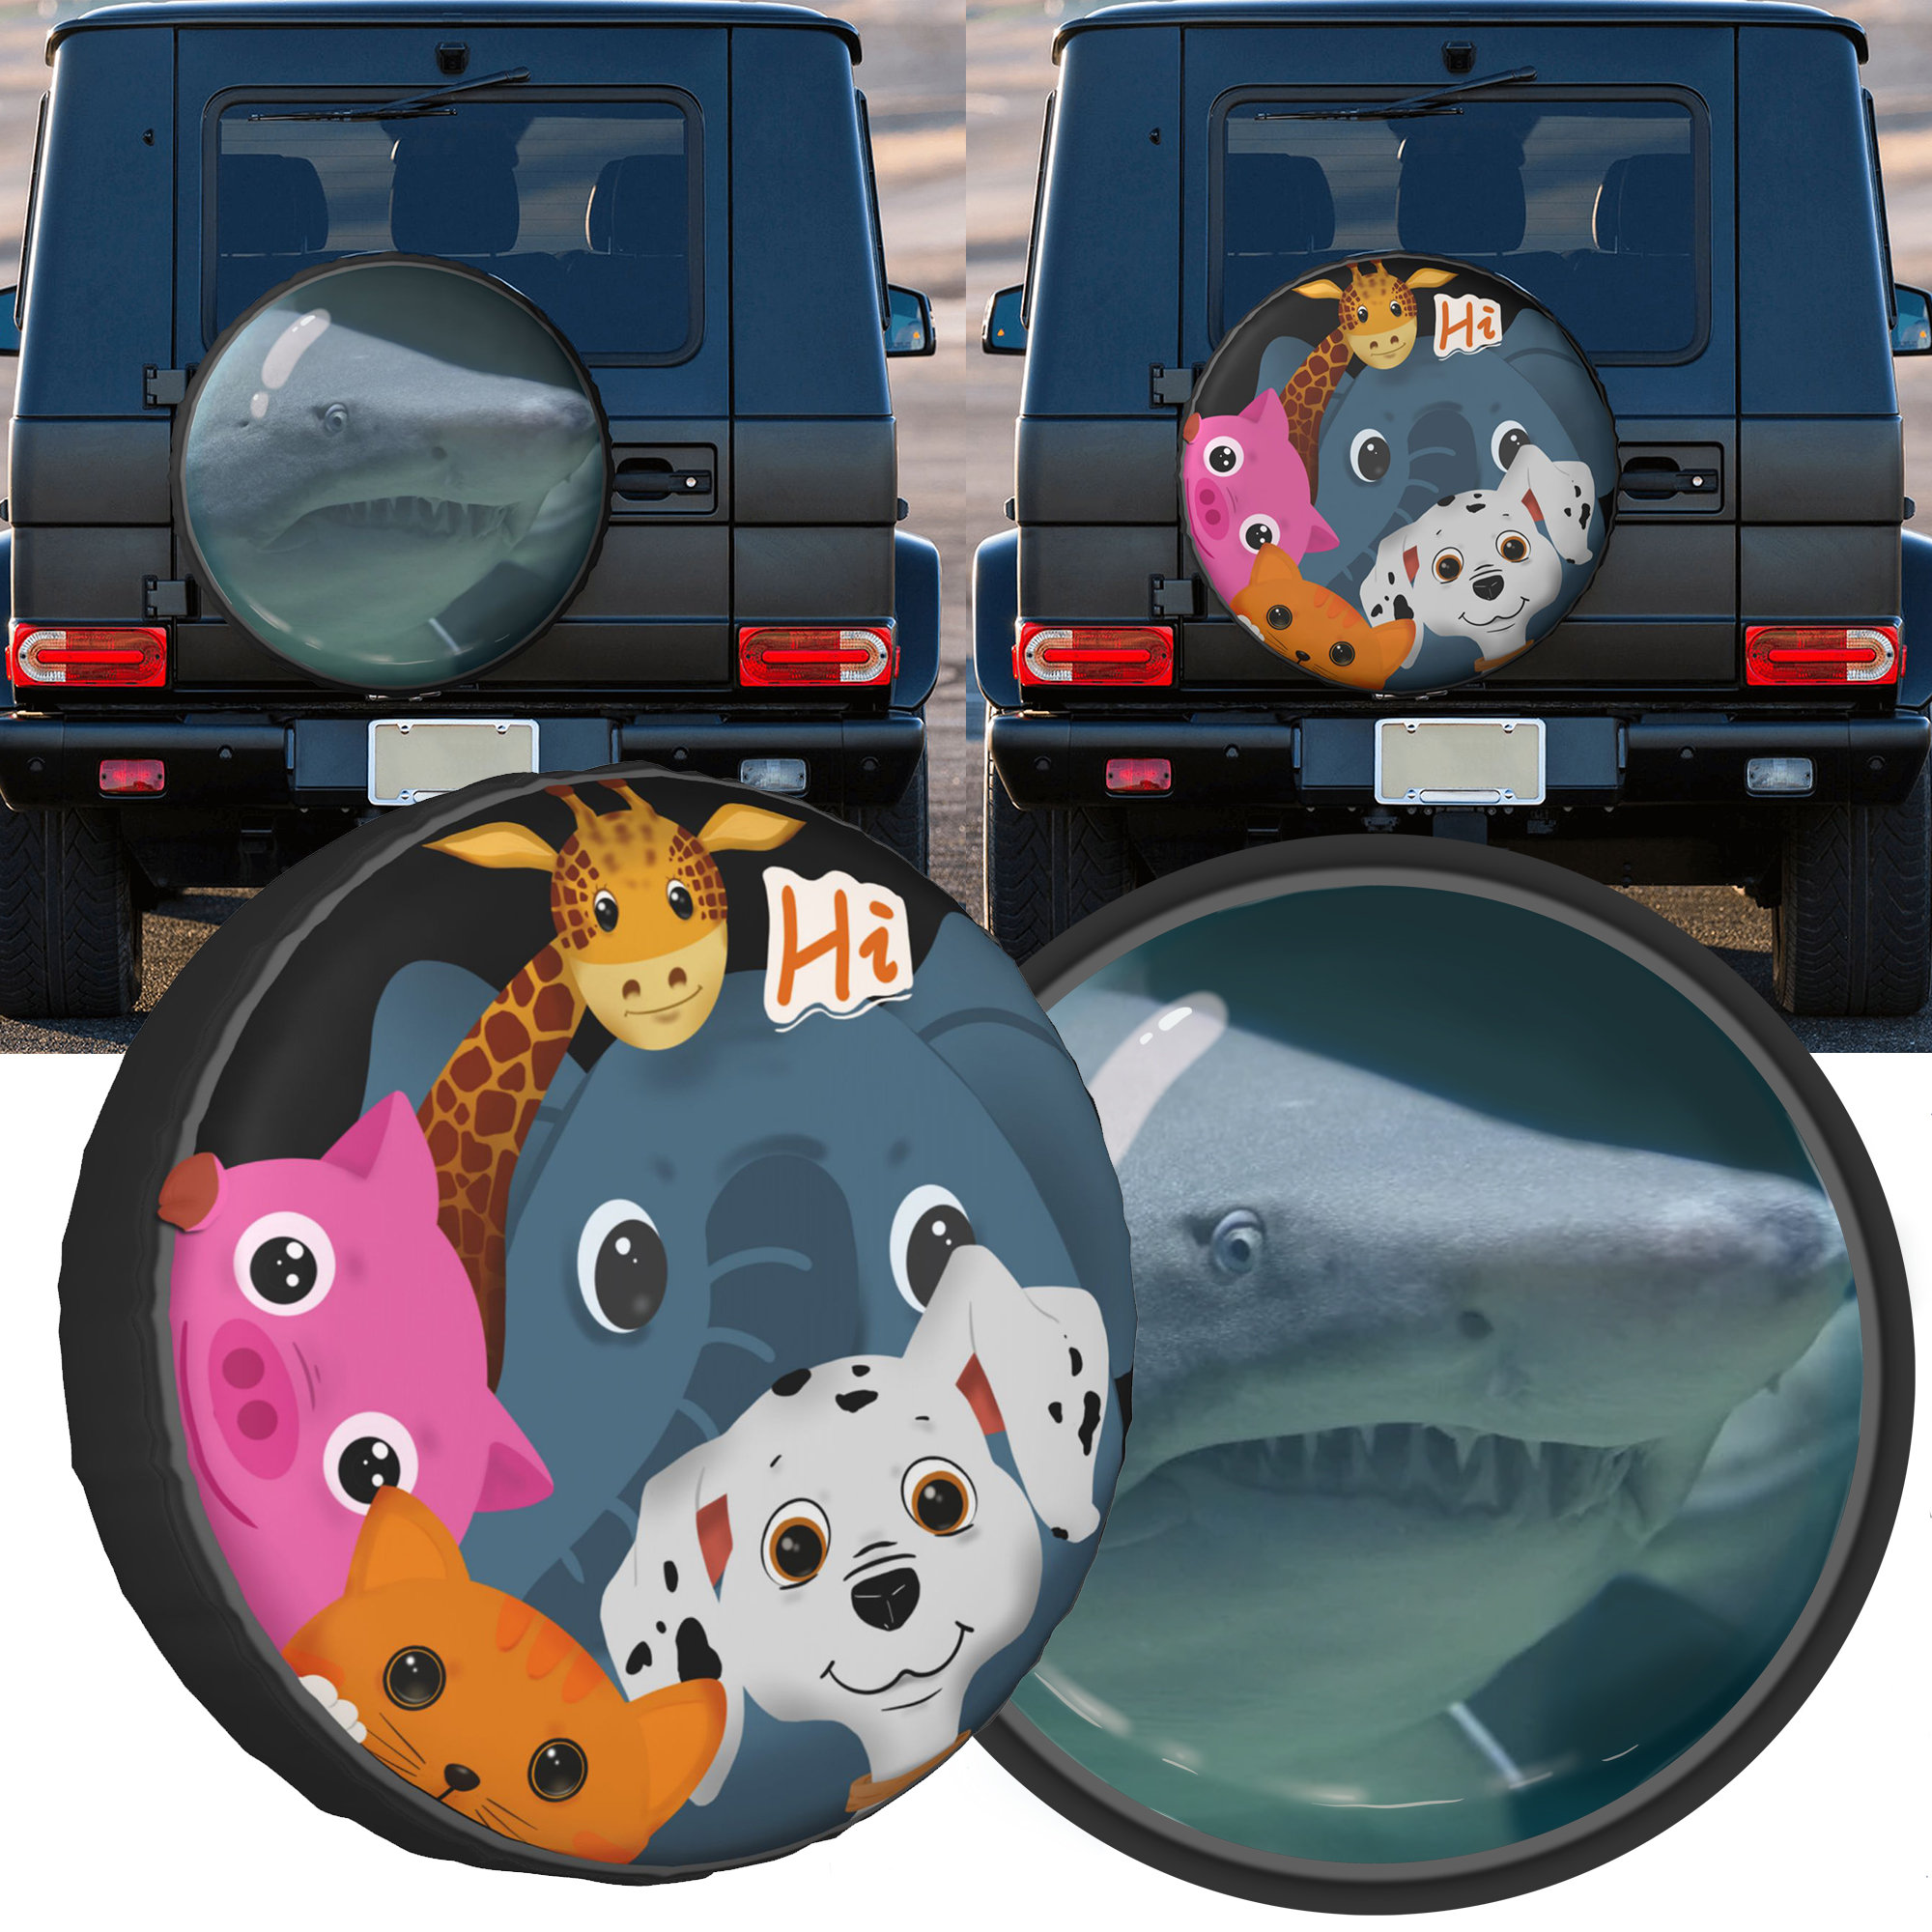 Cows Curiosity Tire Cover 14 inch Waterproof Dust-Proof Universal Spare Tire Wheel Cover Fit for Jeep RV SUV Camper Trailer Accessories - 3